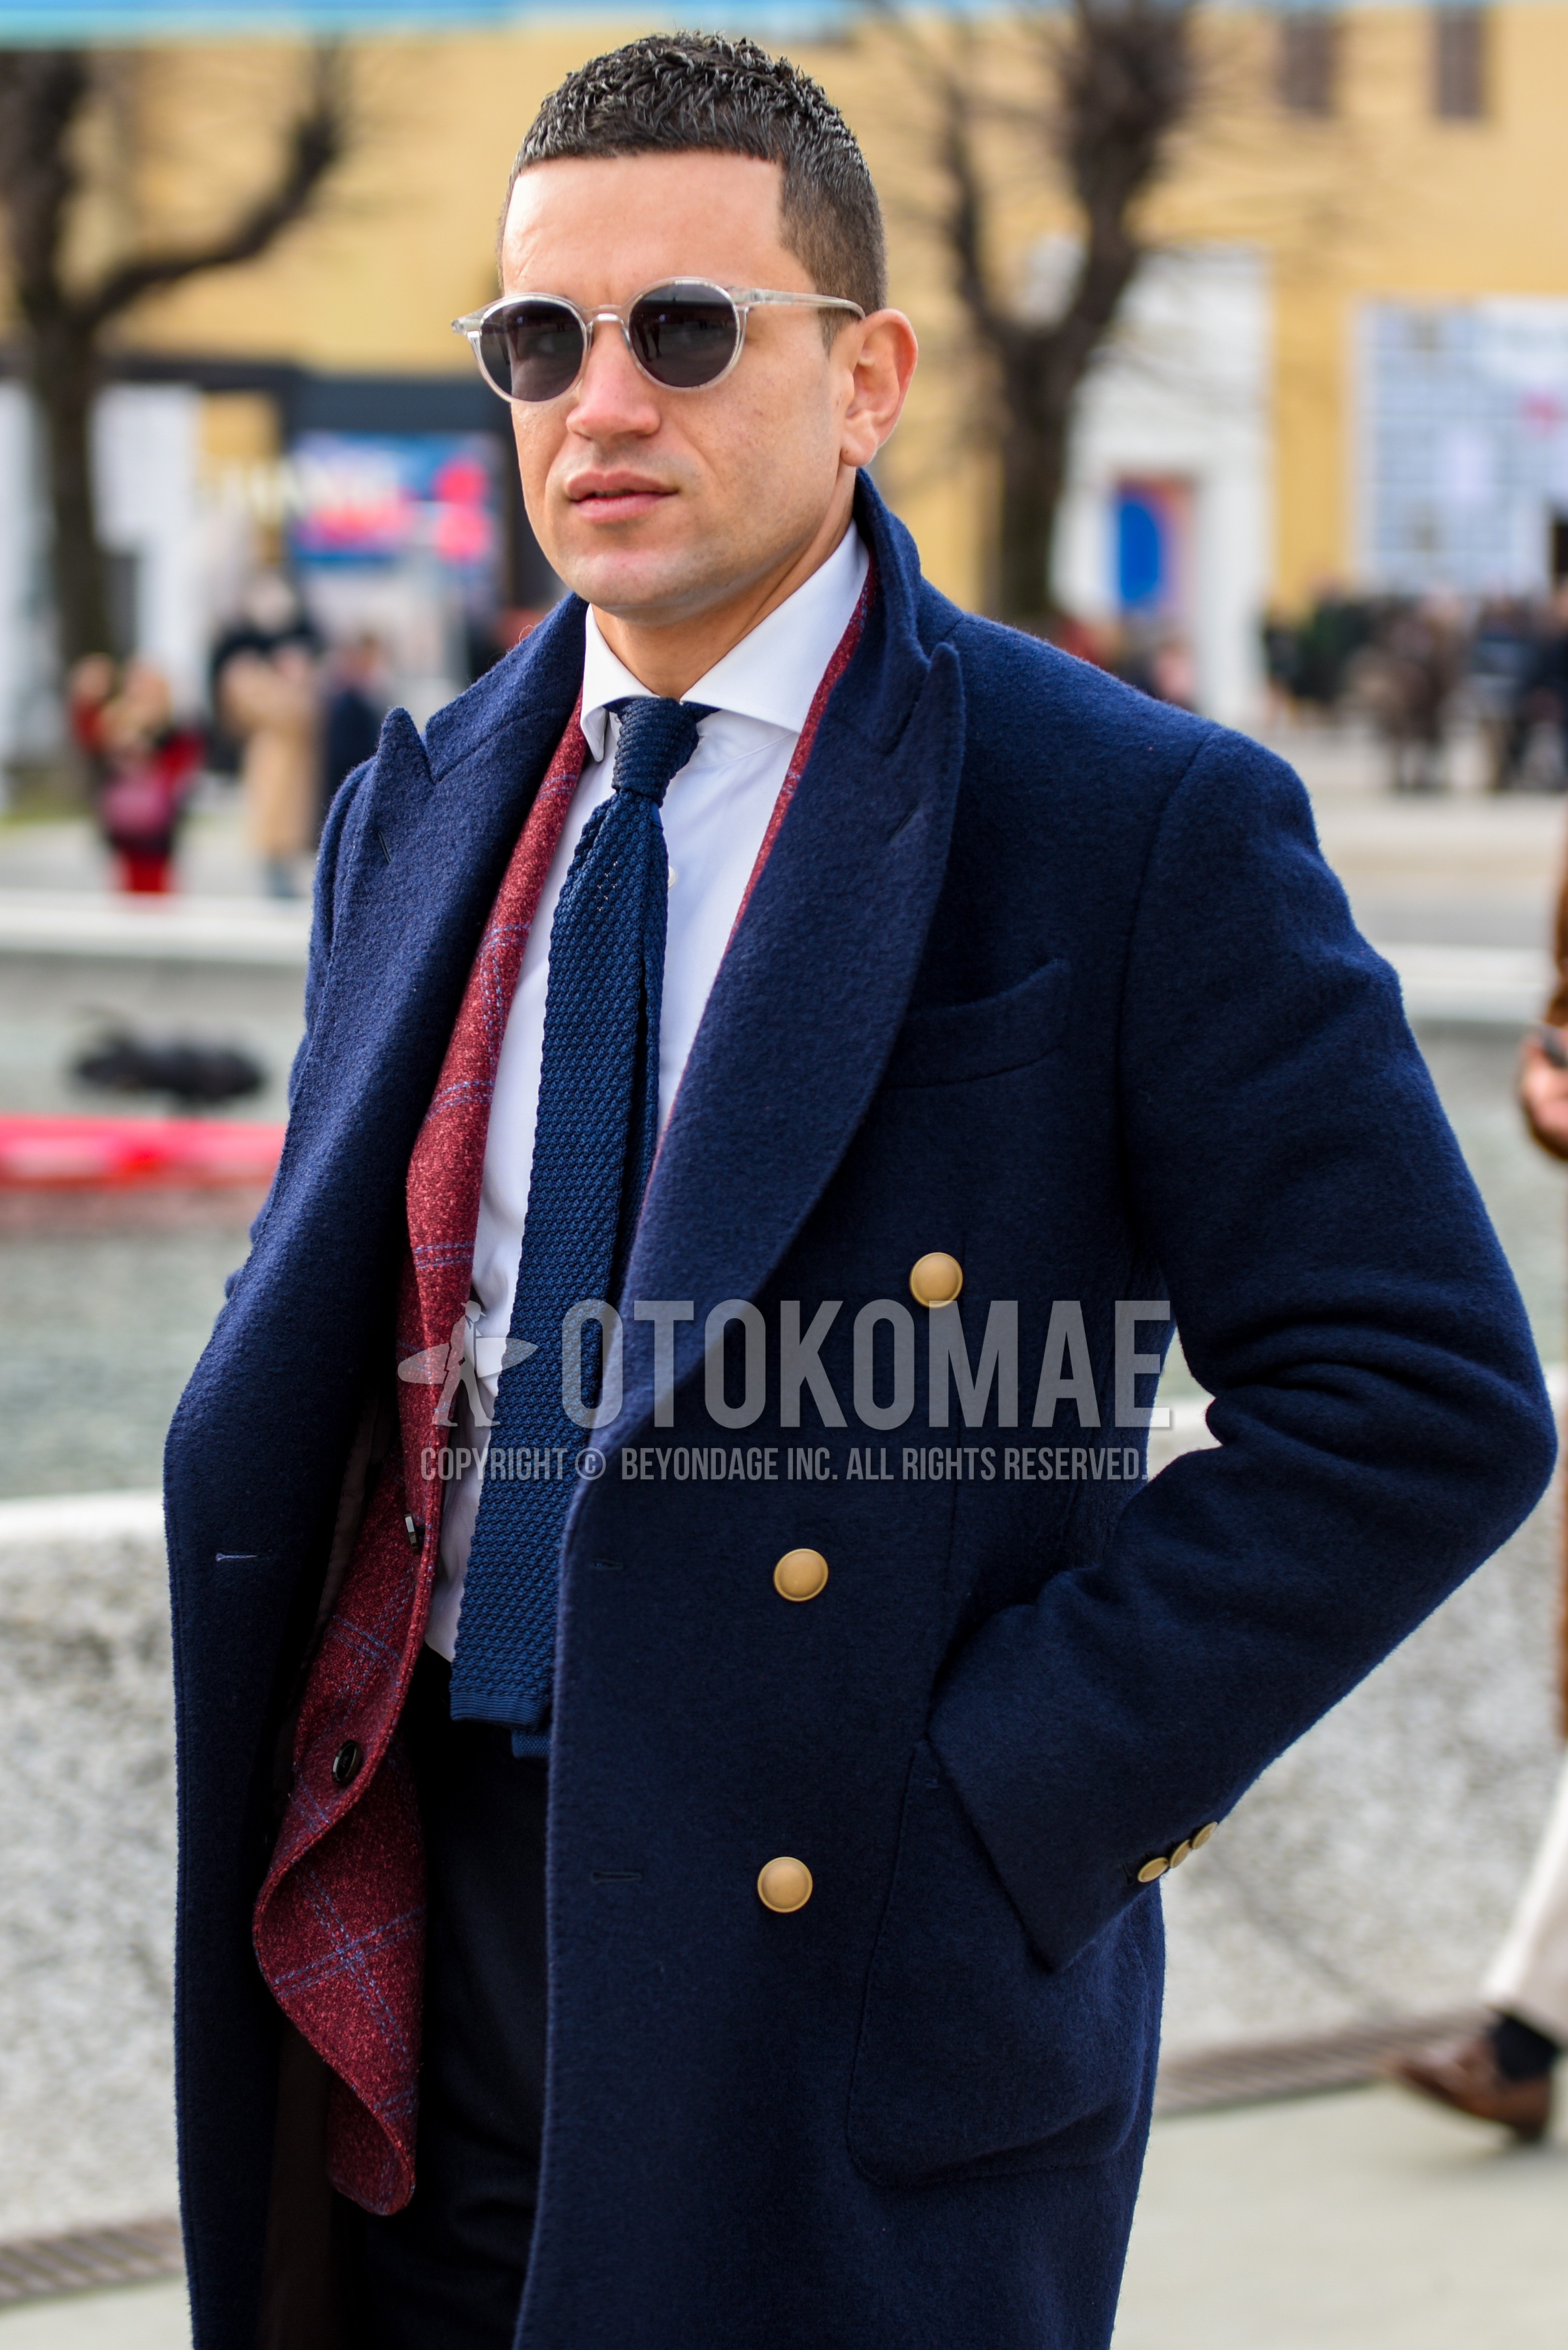 Men's autumn winter outfit with clear plain glasses, navy plain chester coat, white plain shirt, red check tailored jacket, navy plain knit tie.